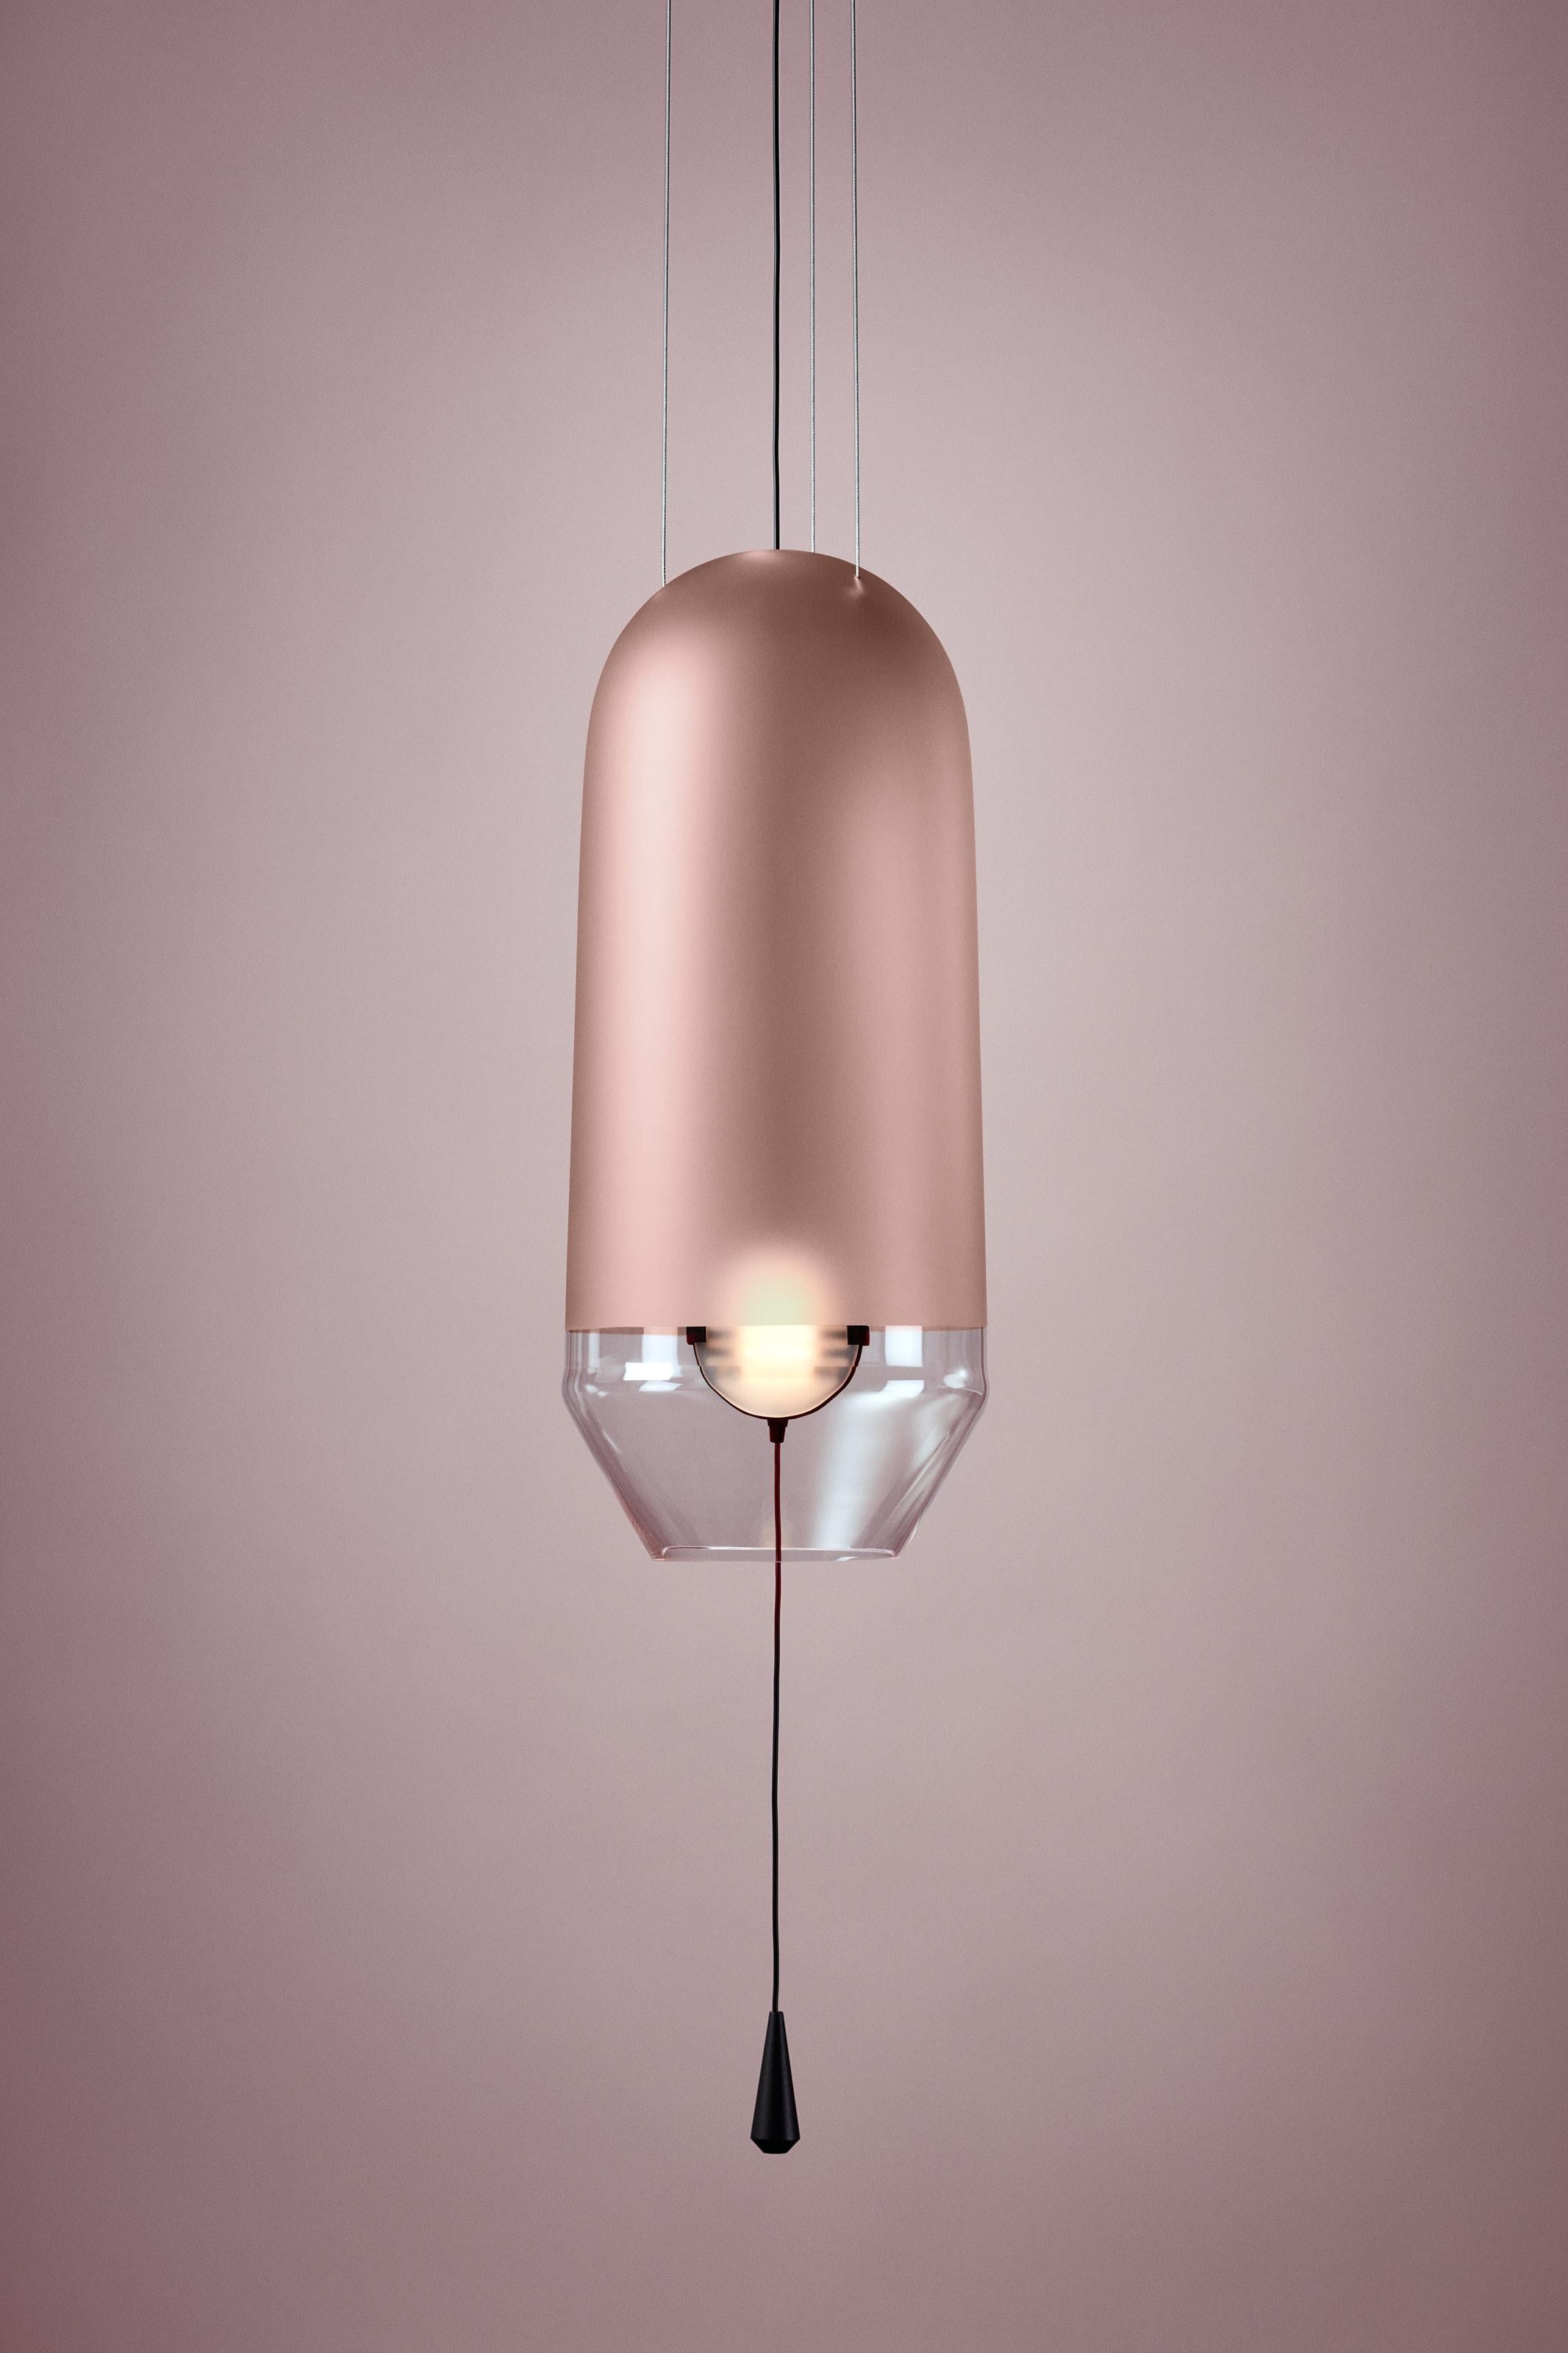 The Limpid Lights collection, a series of lighting objects that incorporate movement as a key element of its design.
By moving the light source away from, or closer to the lighting object, the intensity of the light can be adapted. We figured a way